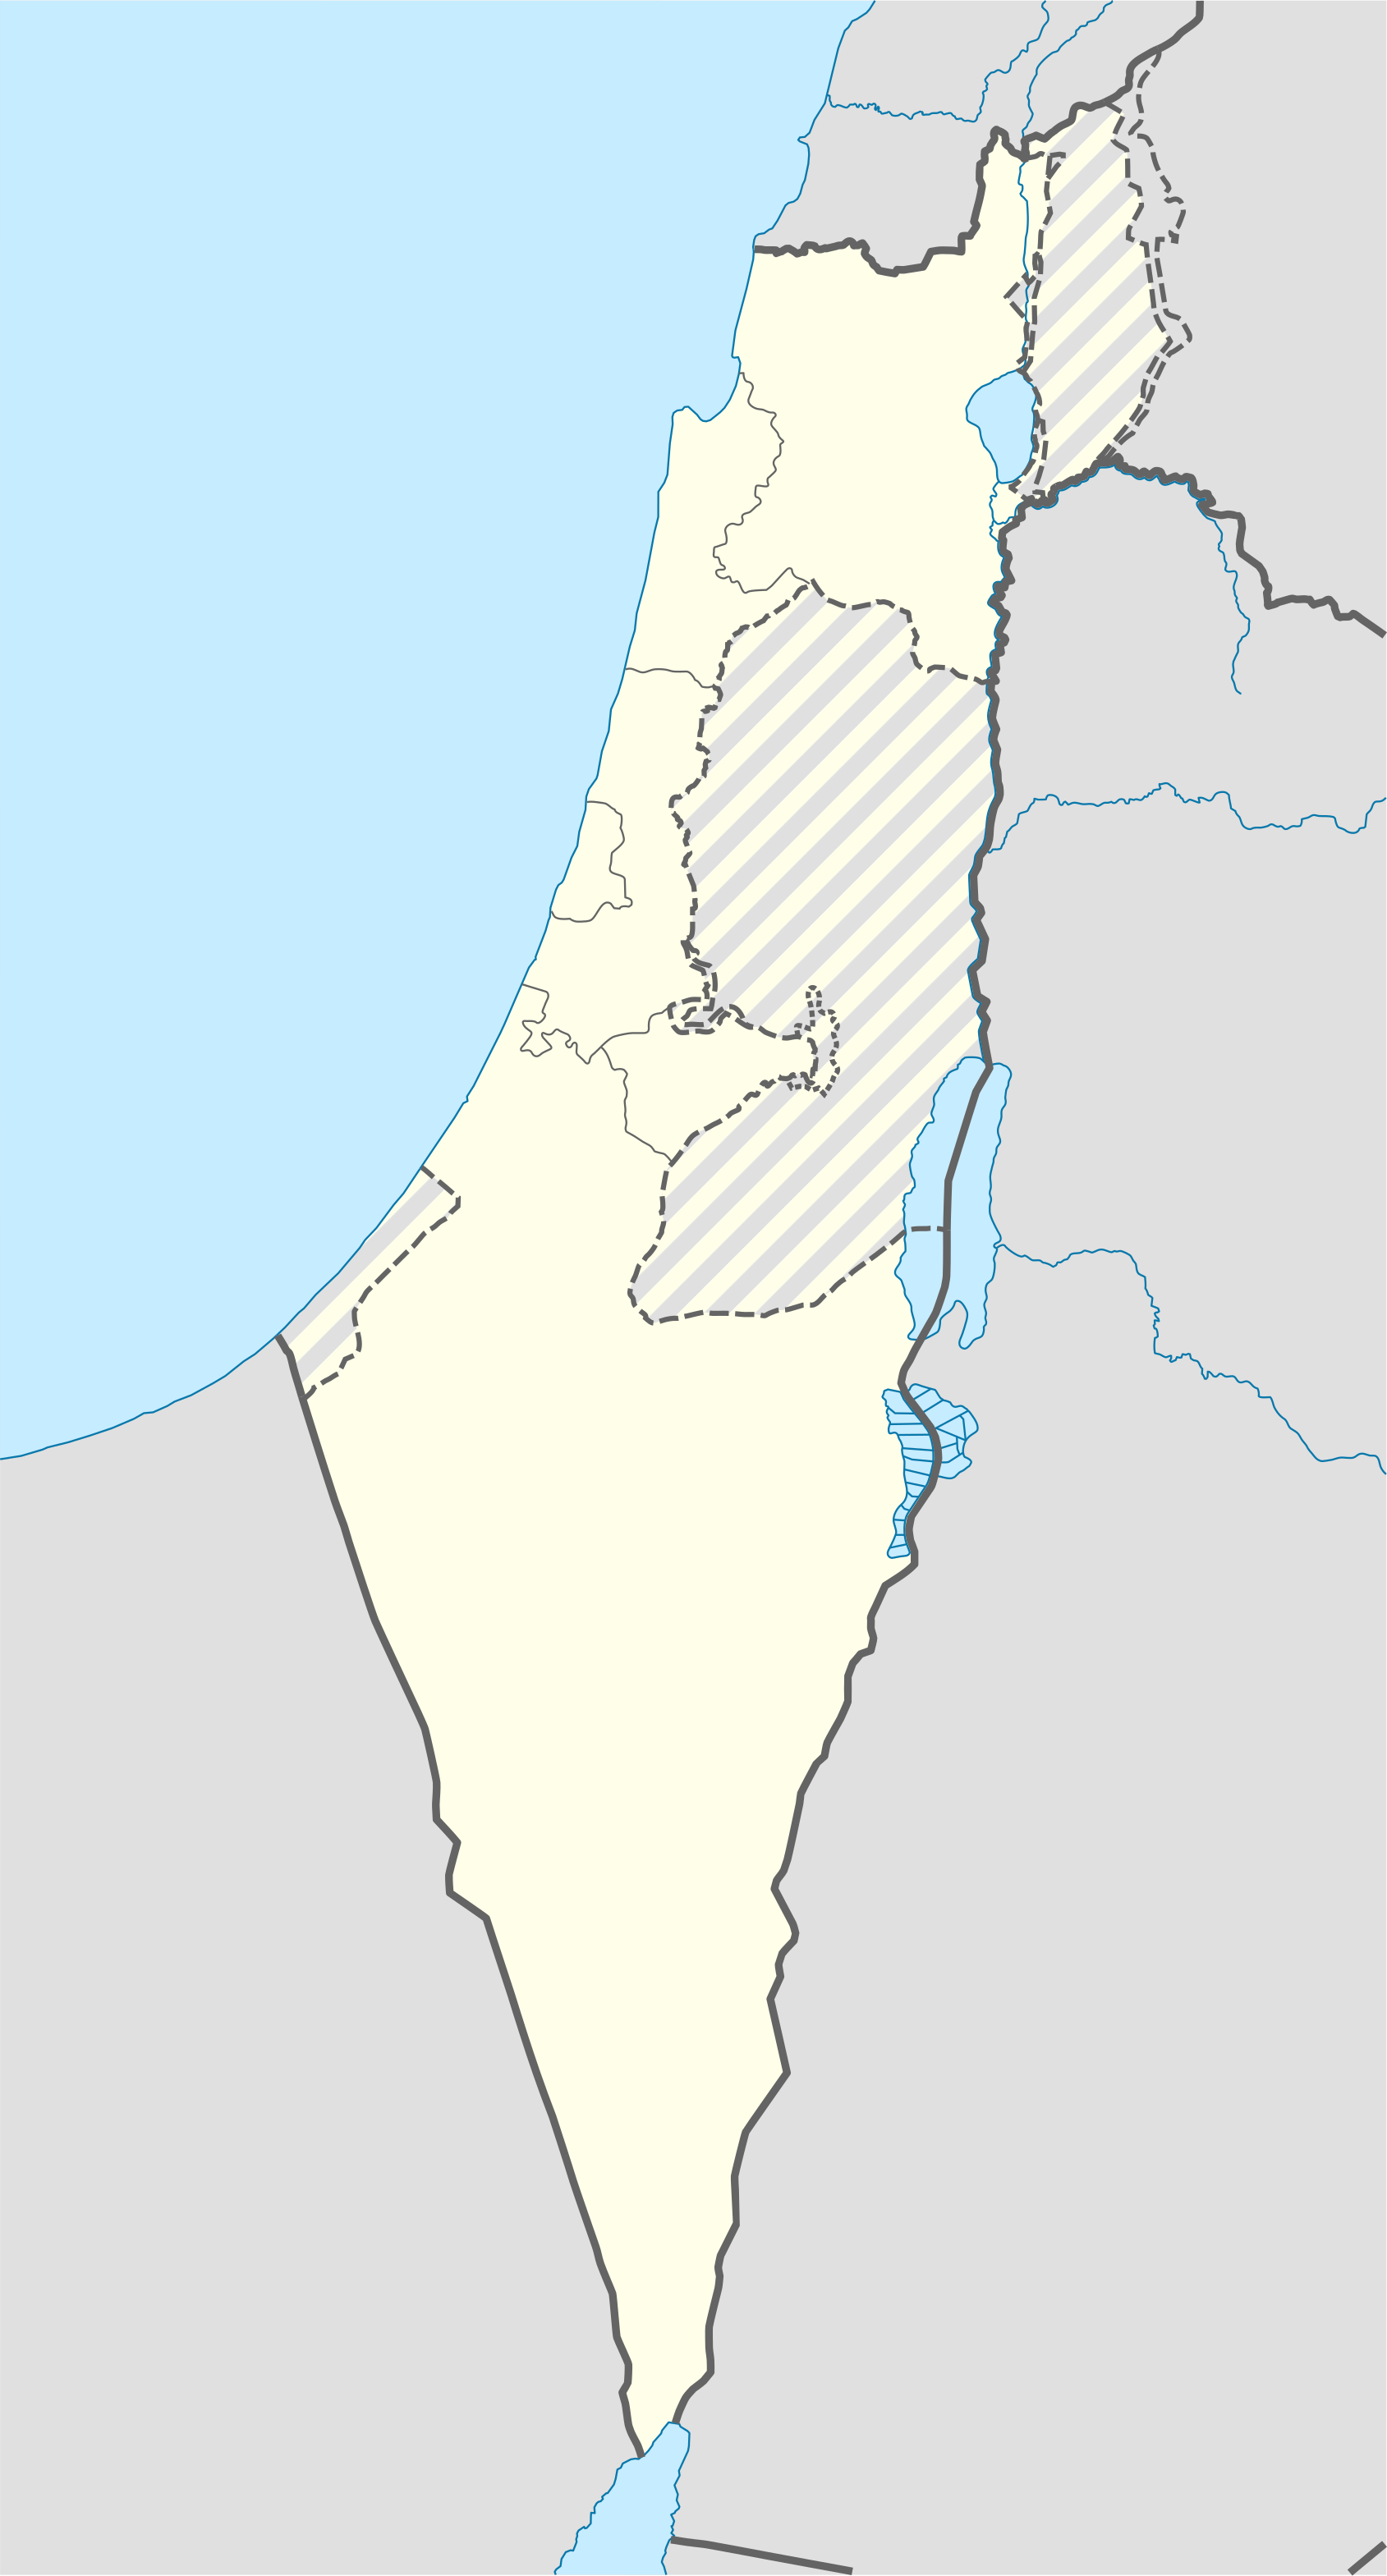 Israeli-Palestinian conflict detailed map is located in Israel